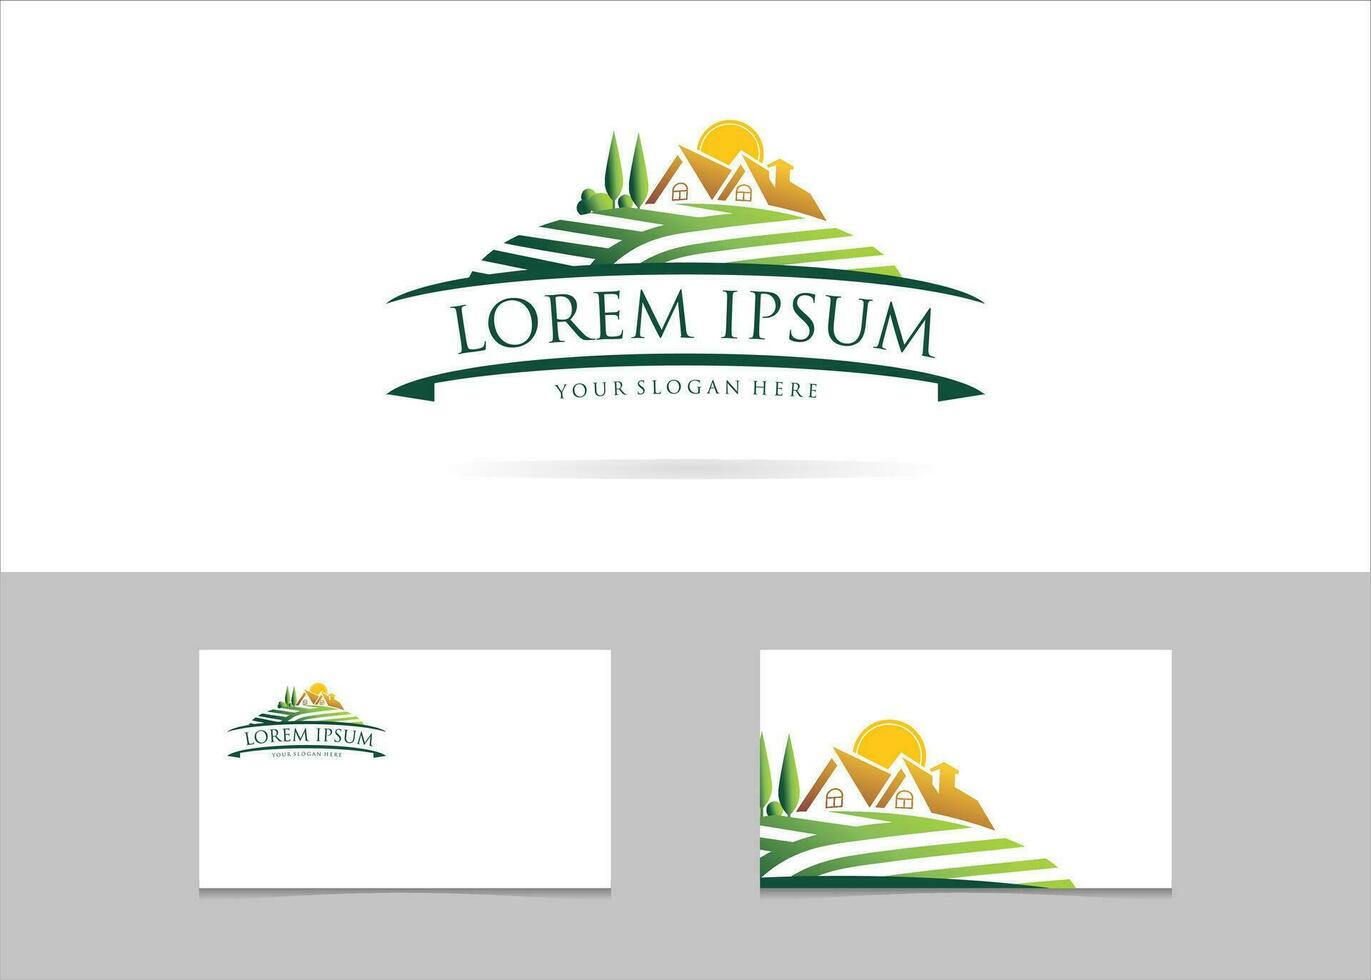 the logo for a farm, residential logo business with a mountain vector